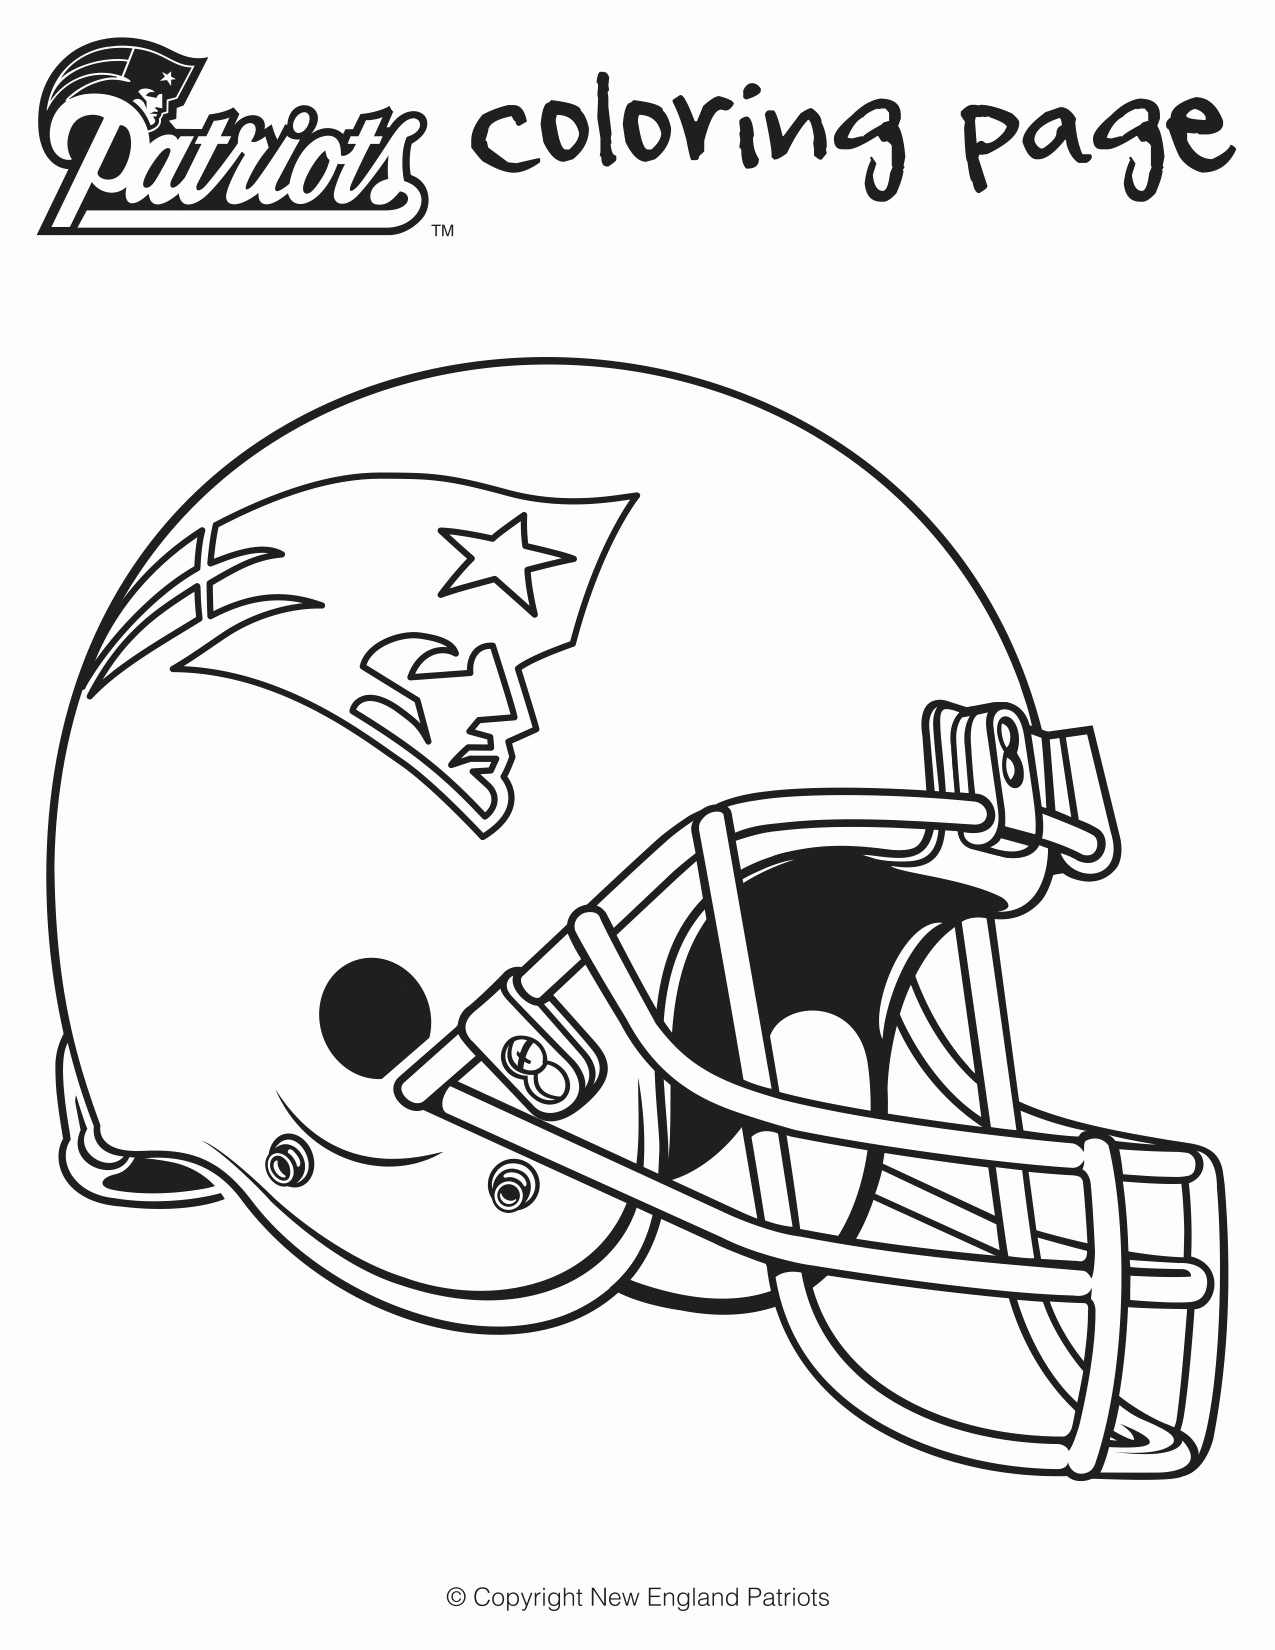 Football Coloring Sheets for Kids - Charlene Chronicles